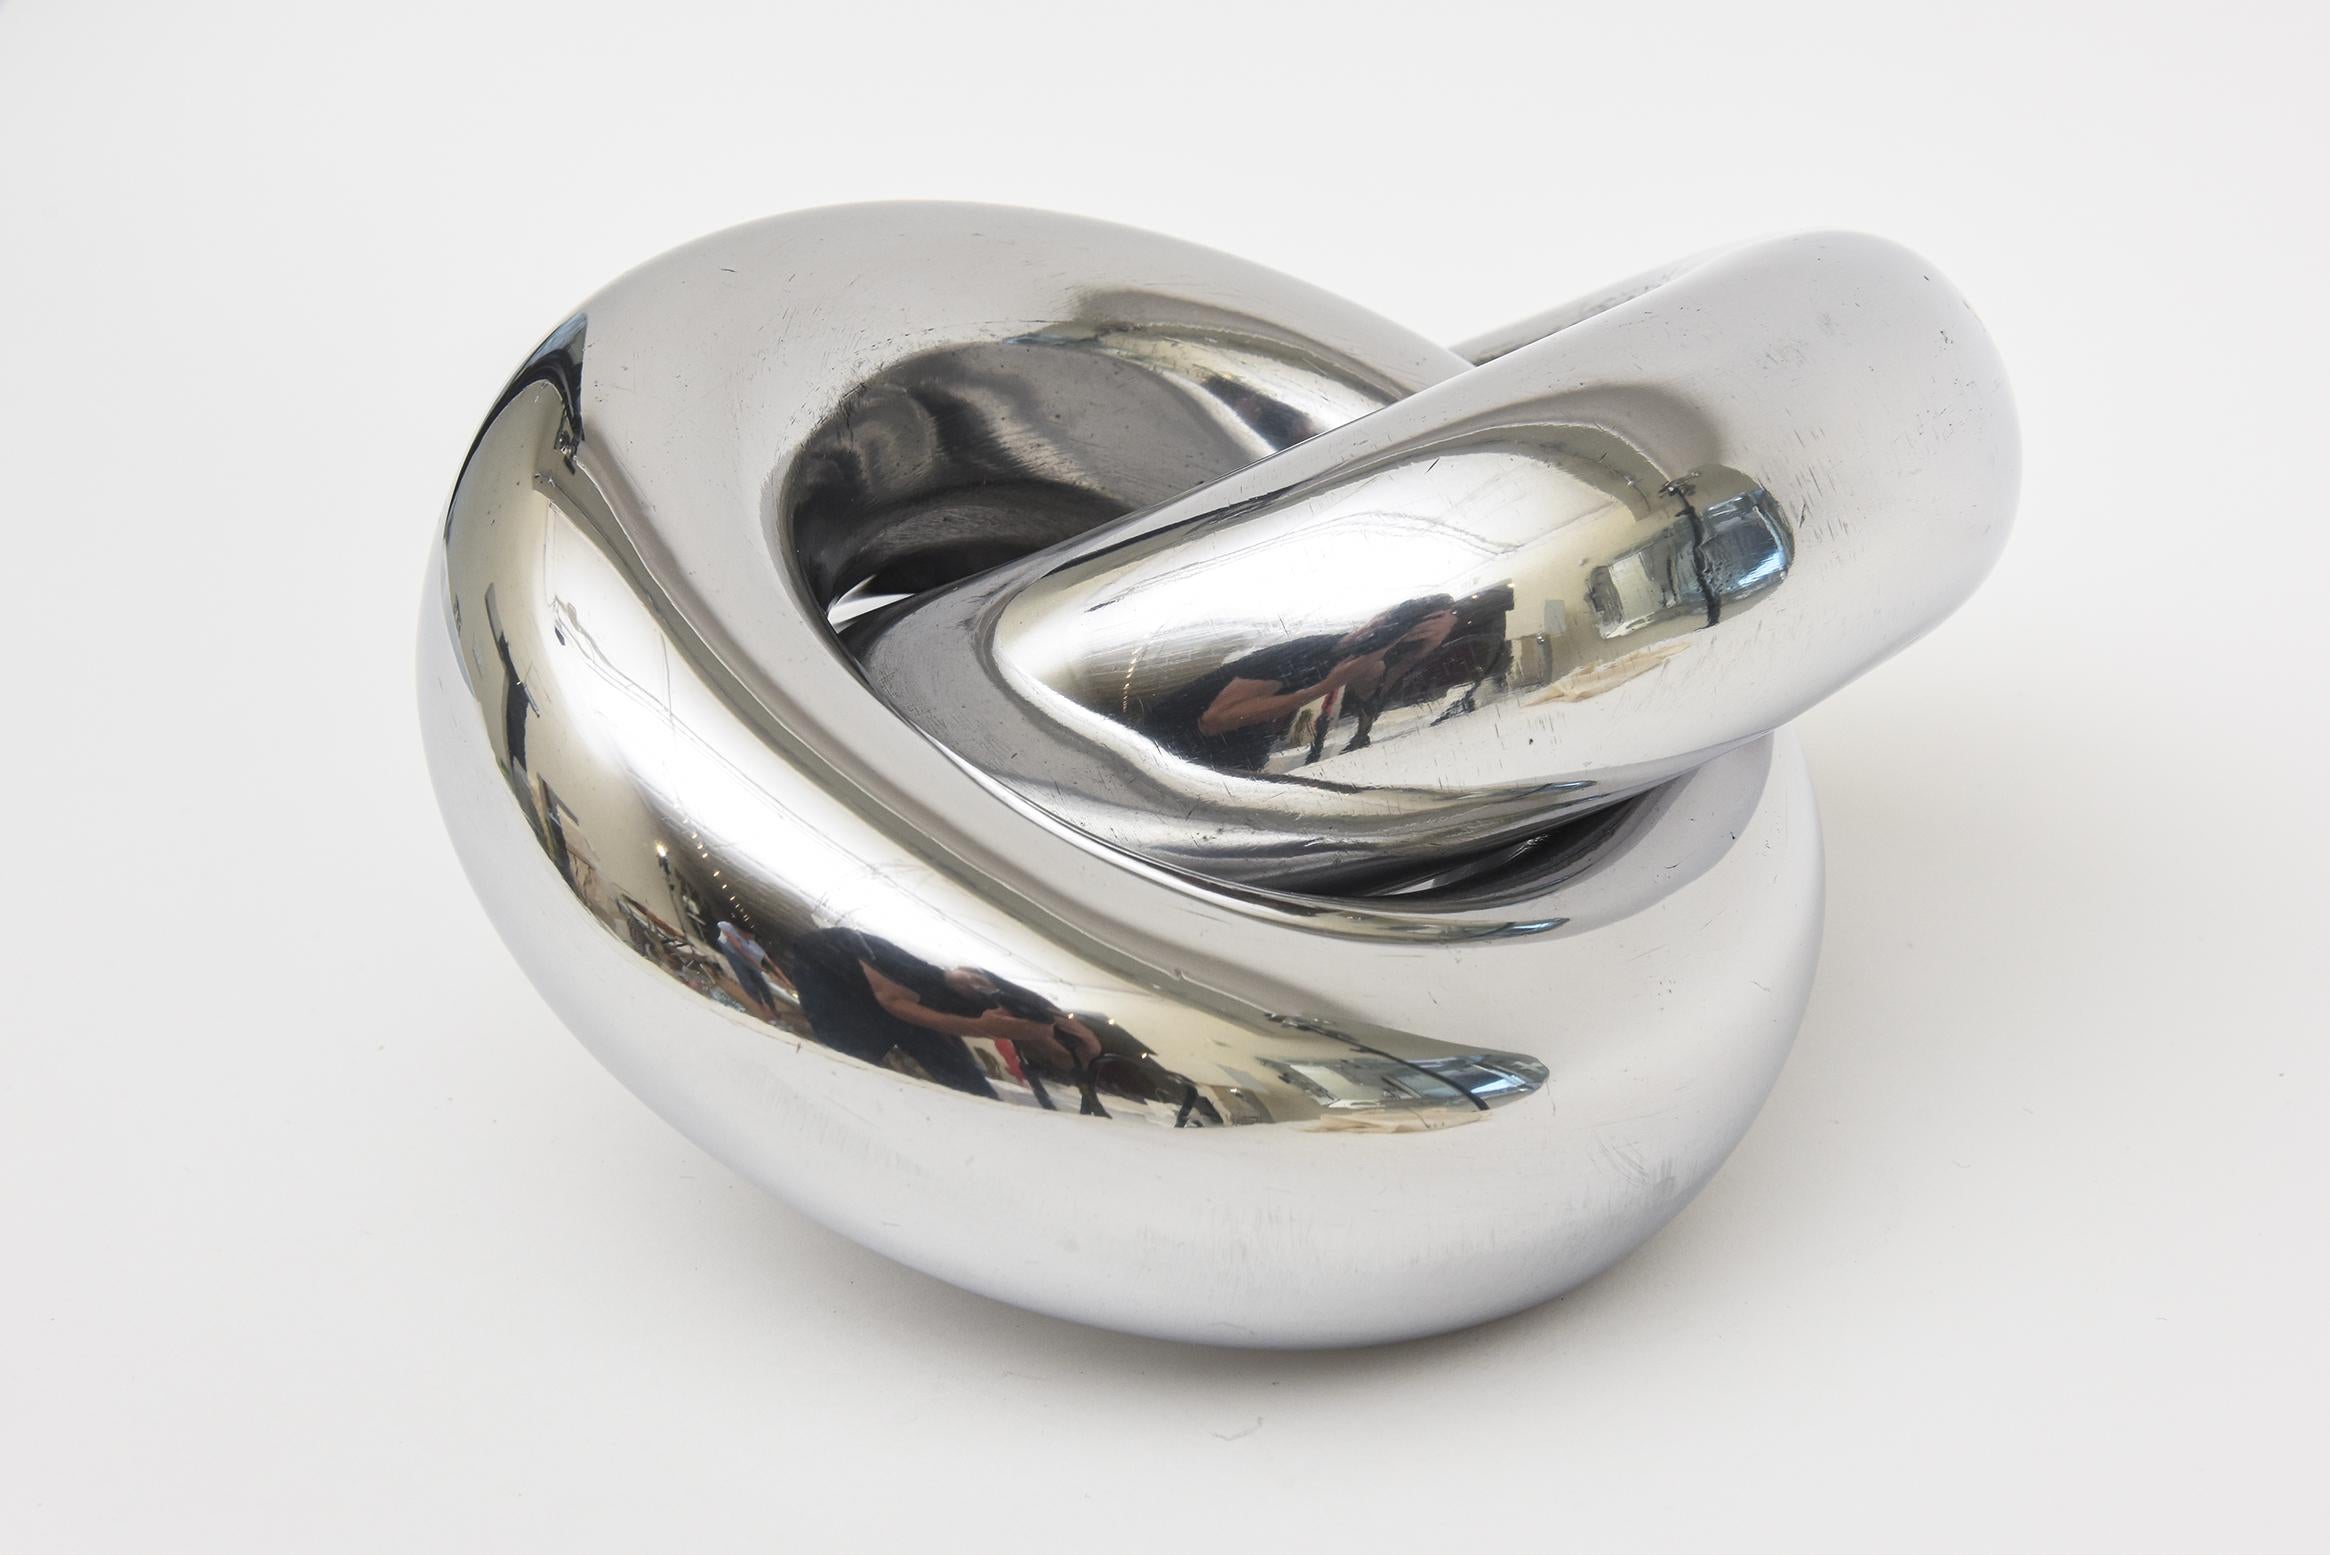 American Vintage Twisted Intertwined Chrome Ring Sculpture For Sale